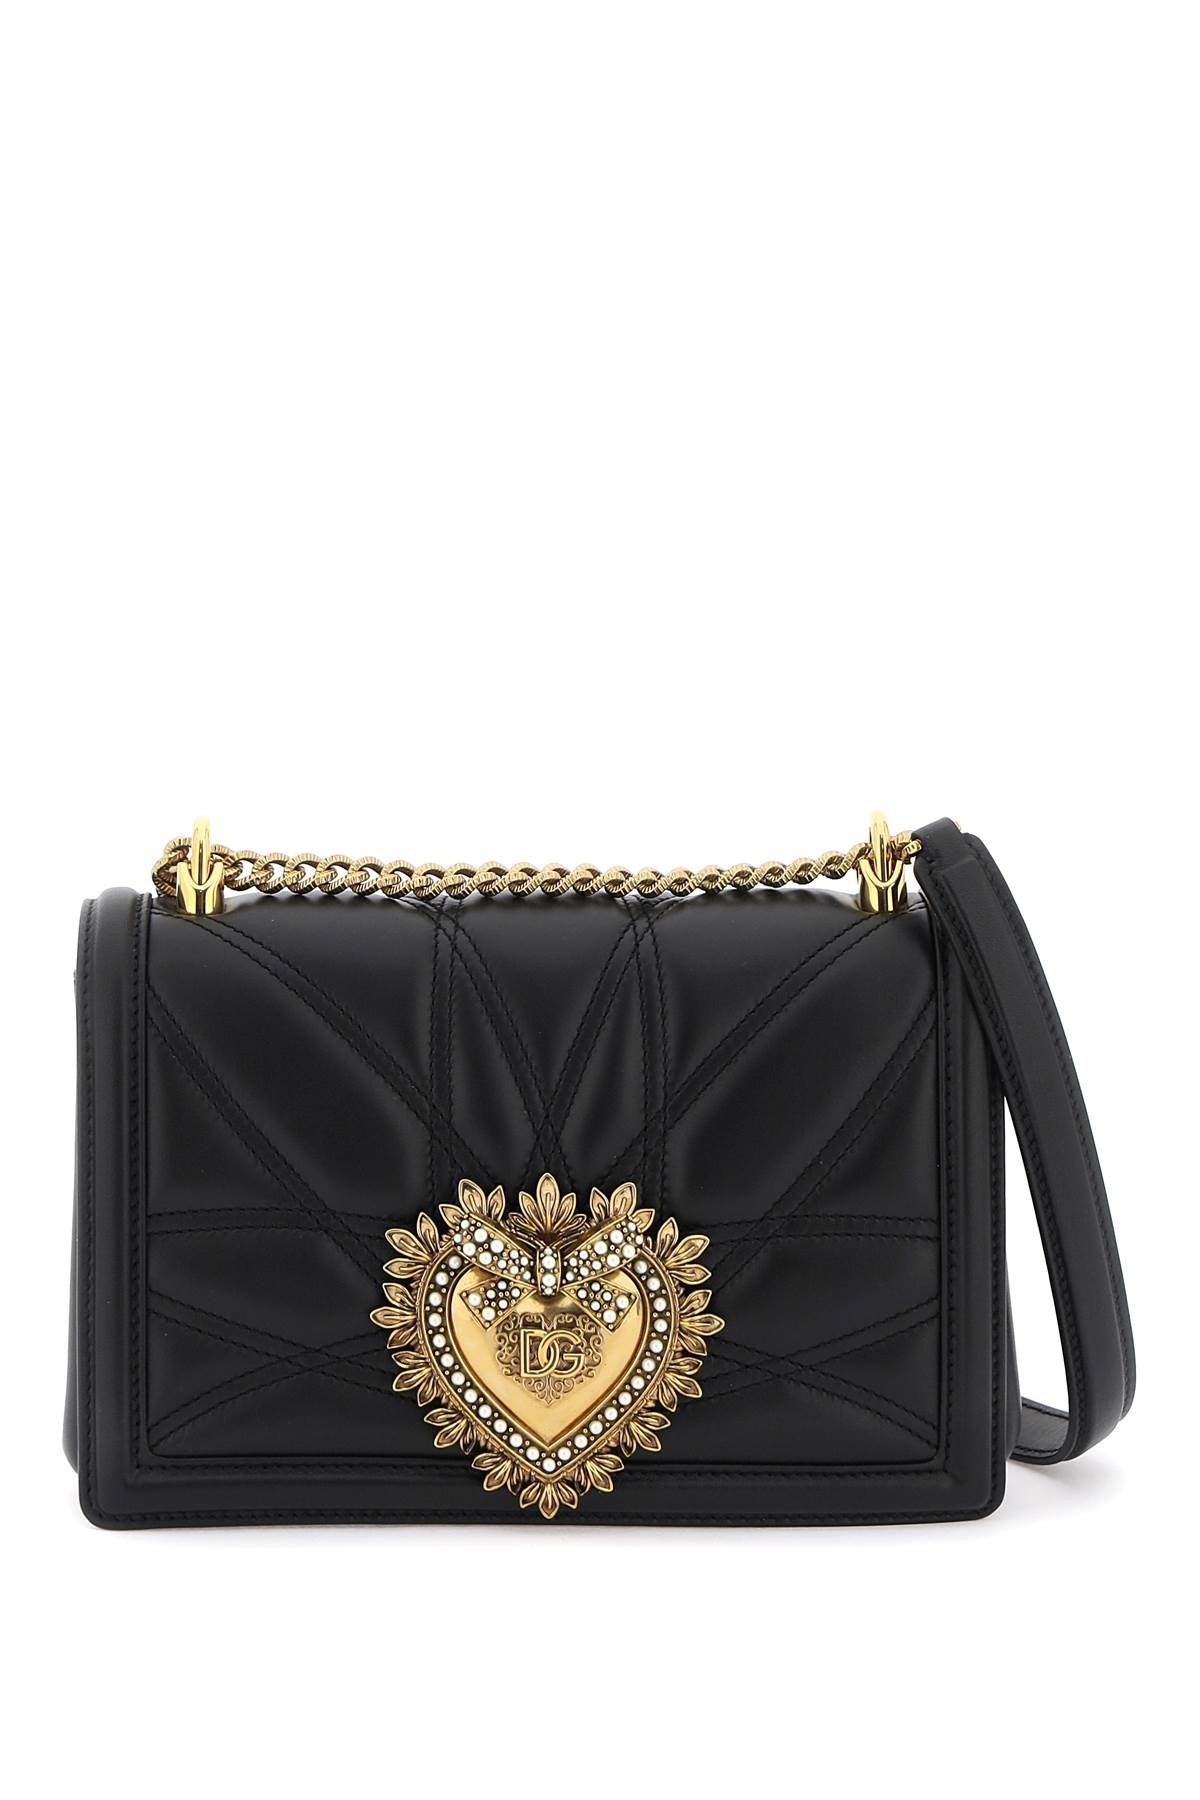 Dolce & Gabbana Medium Devotion Bag In Quilted Nappa Leather Women - 1